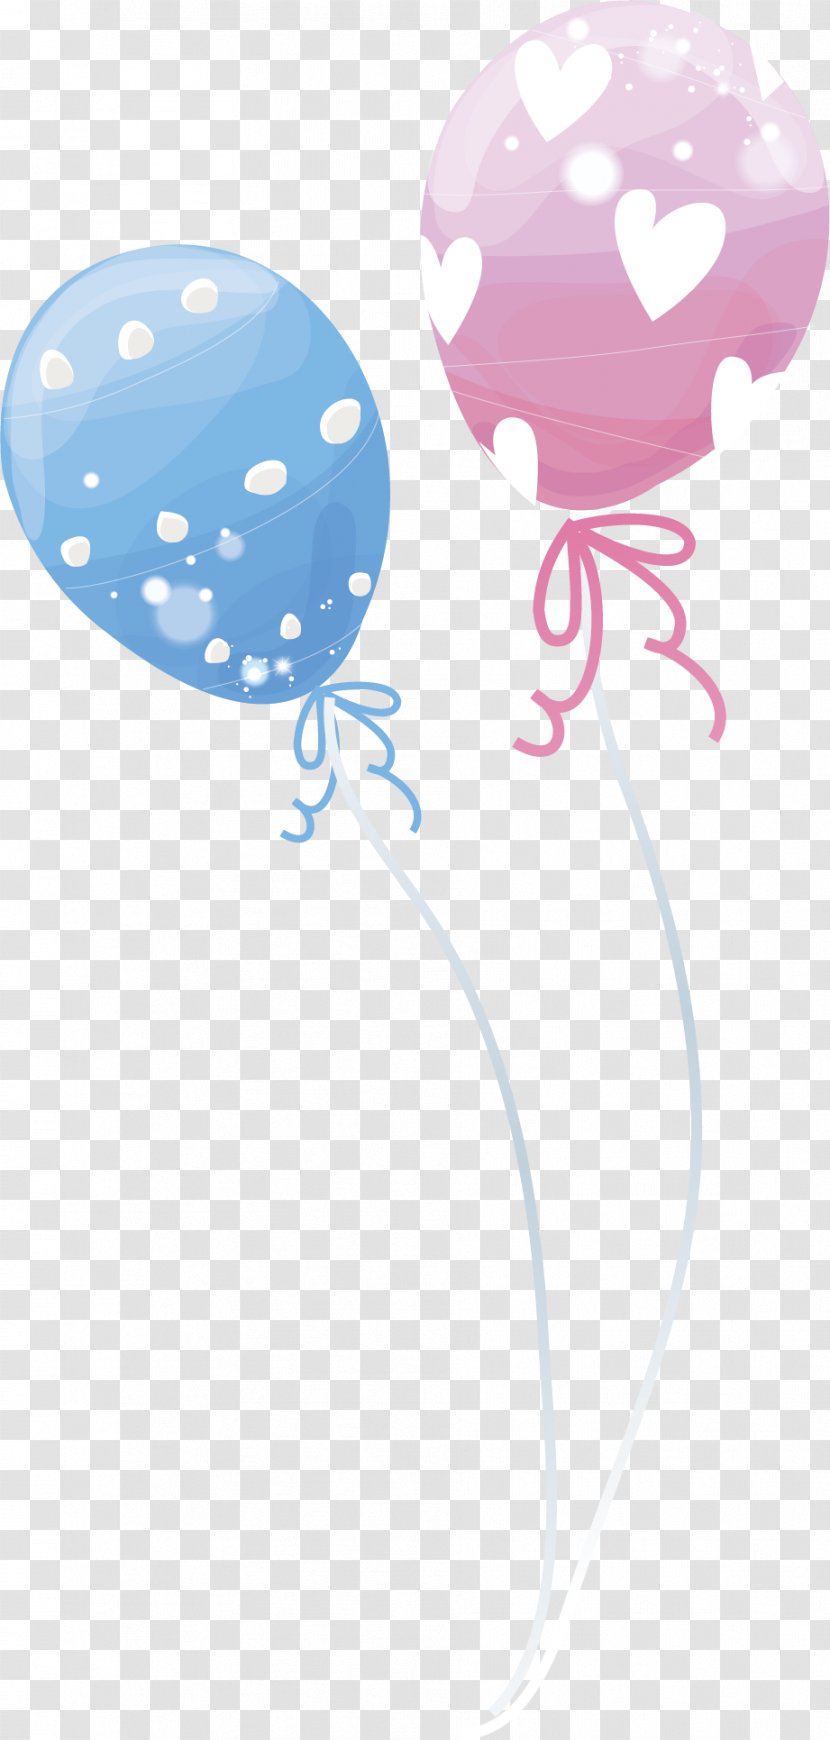 Balloon Illustration - Point - Creative Transparent PNG